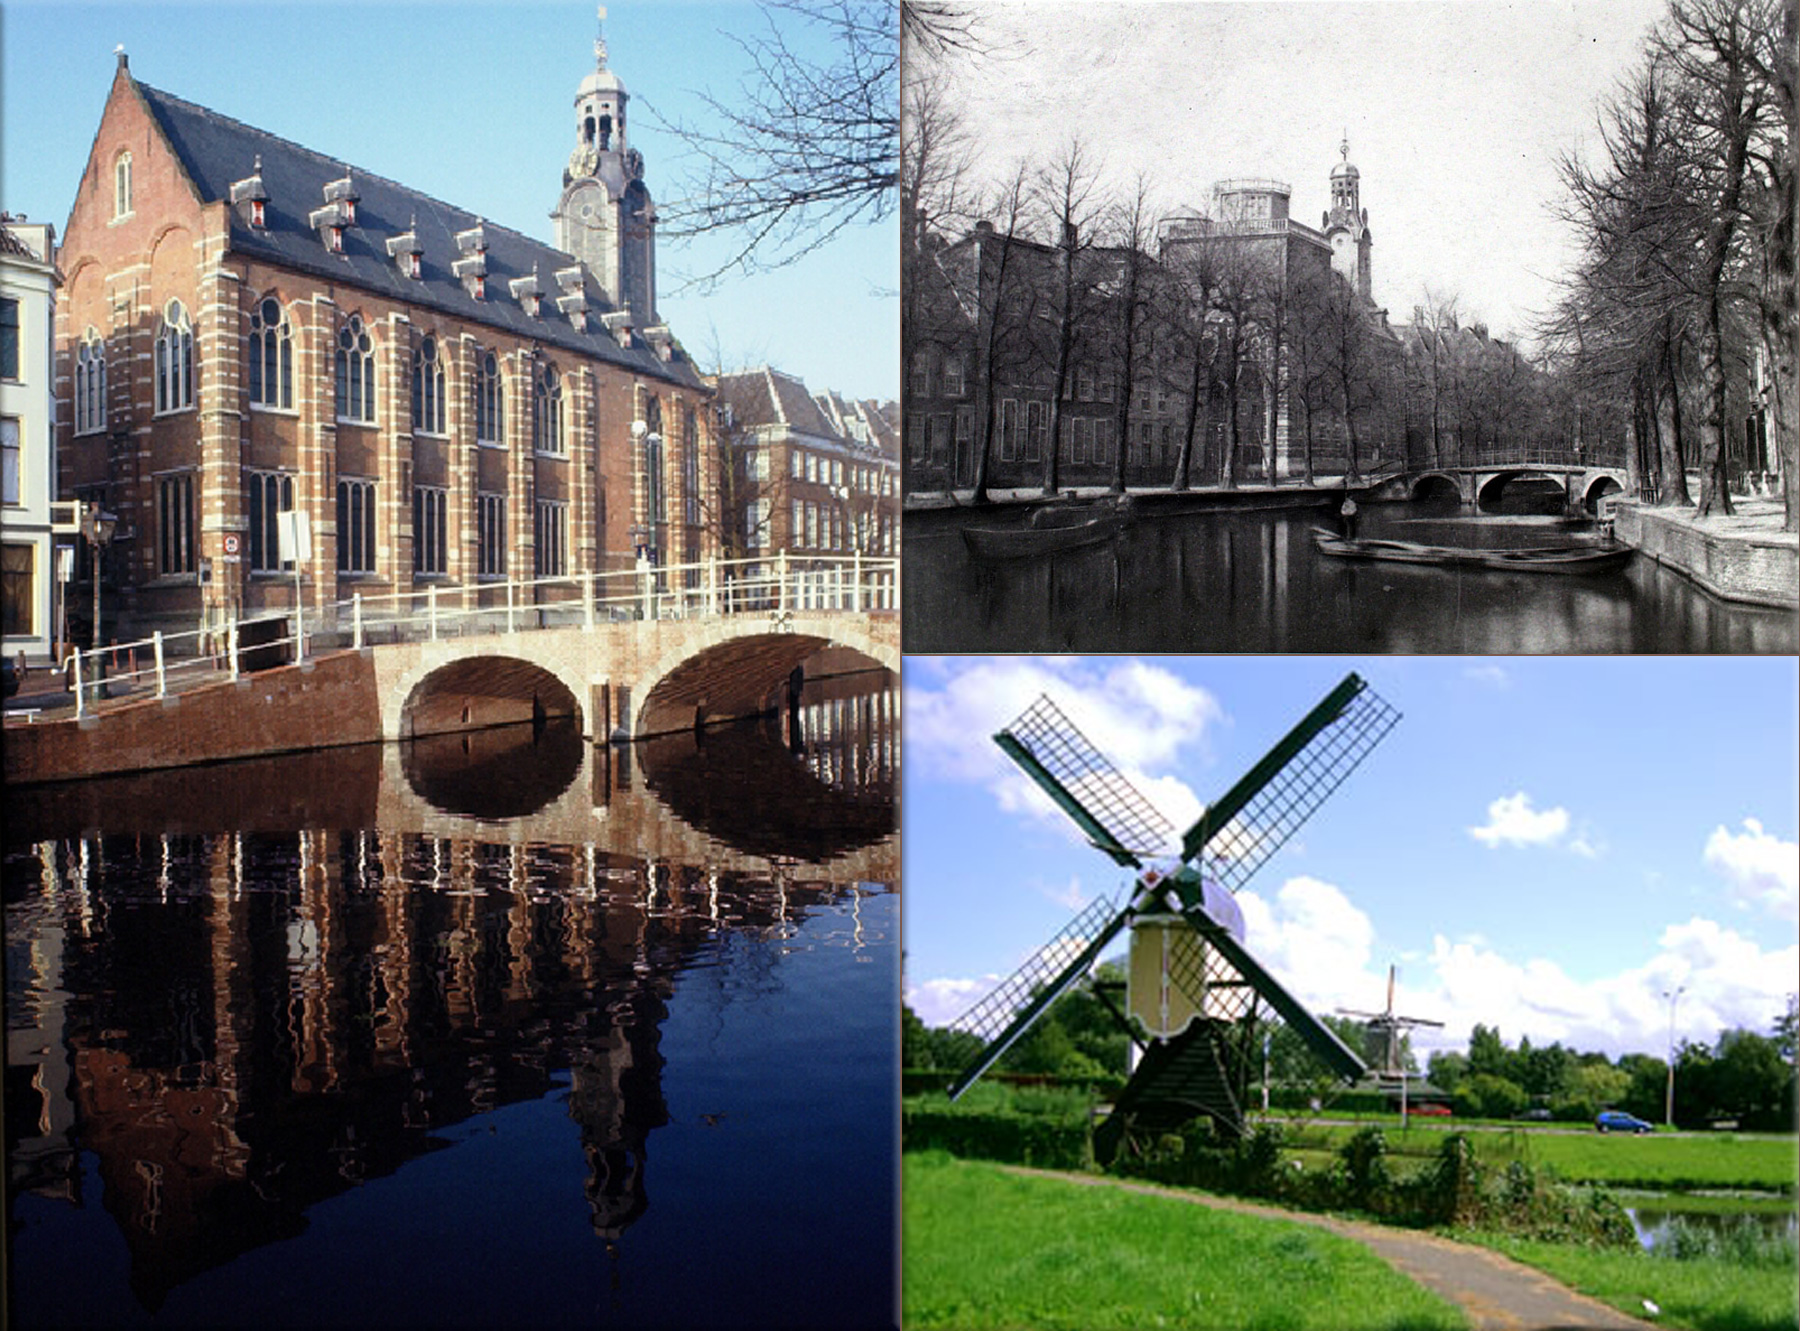 Leiden University (Dutch: Universiteit Leiden), located in the city of Leiden, is the oldest university in the Netherlands (The university was founded in 1575 by William, Prince of Orange, leader of the Dutch Revolt in the Eighty Years' War)